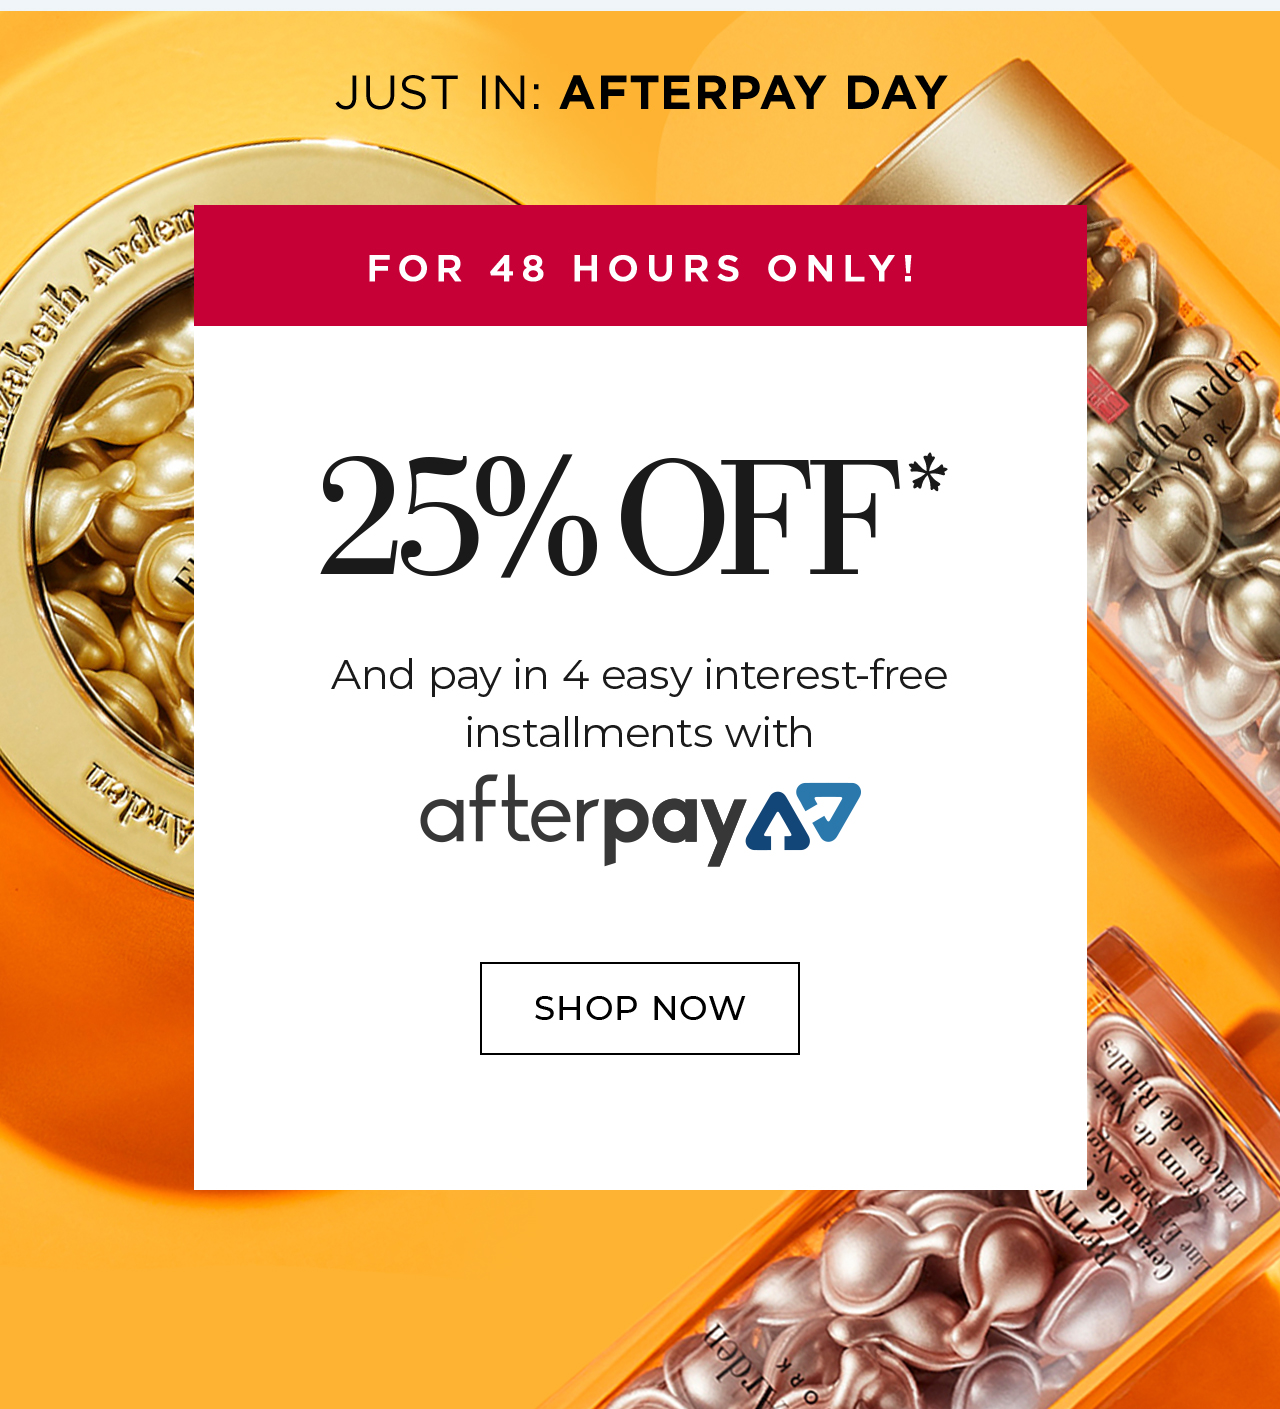 JUST IN: AFTERPAY DAY FOR 48 HOURS ONLY! 25% OFF* And pay in 4 easy interest-free  installments with afterpay SHOP NOW